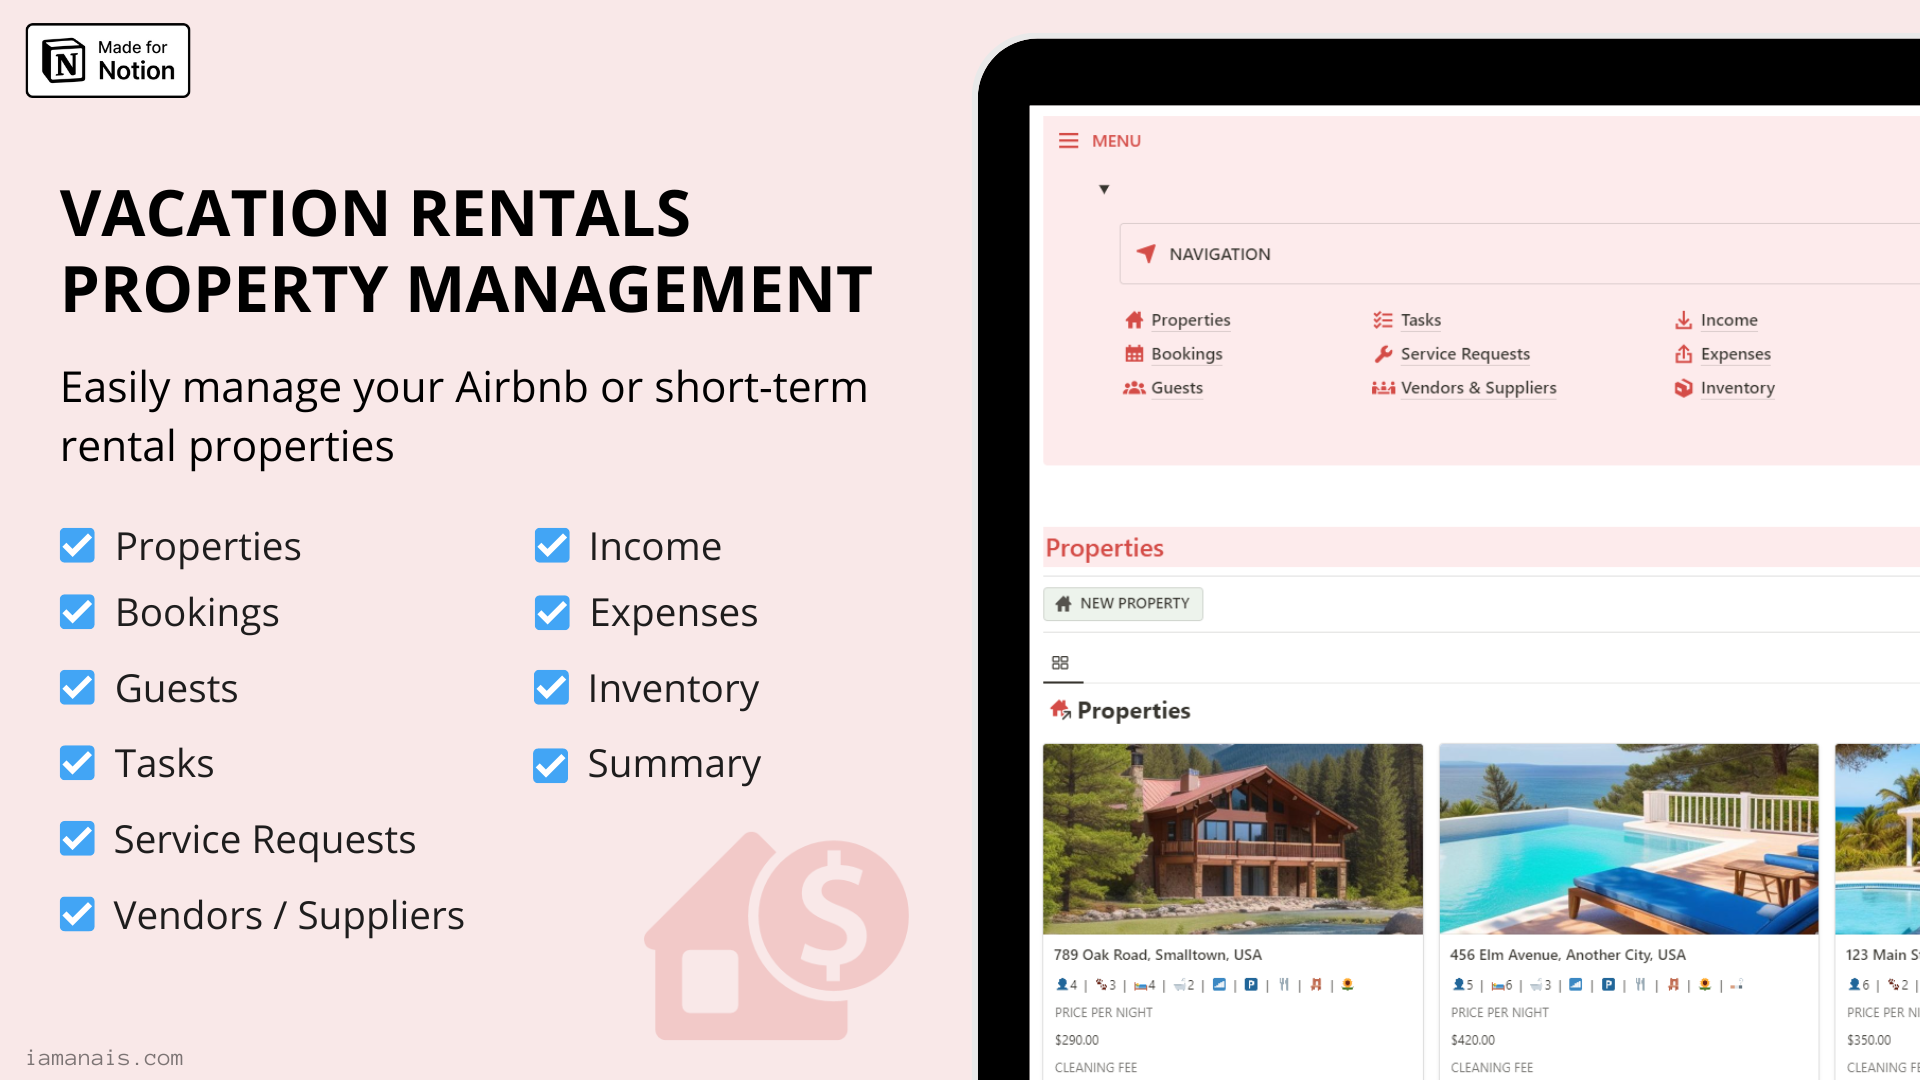 Vacation rentals property management (Notion Template)